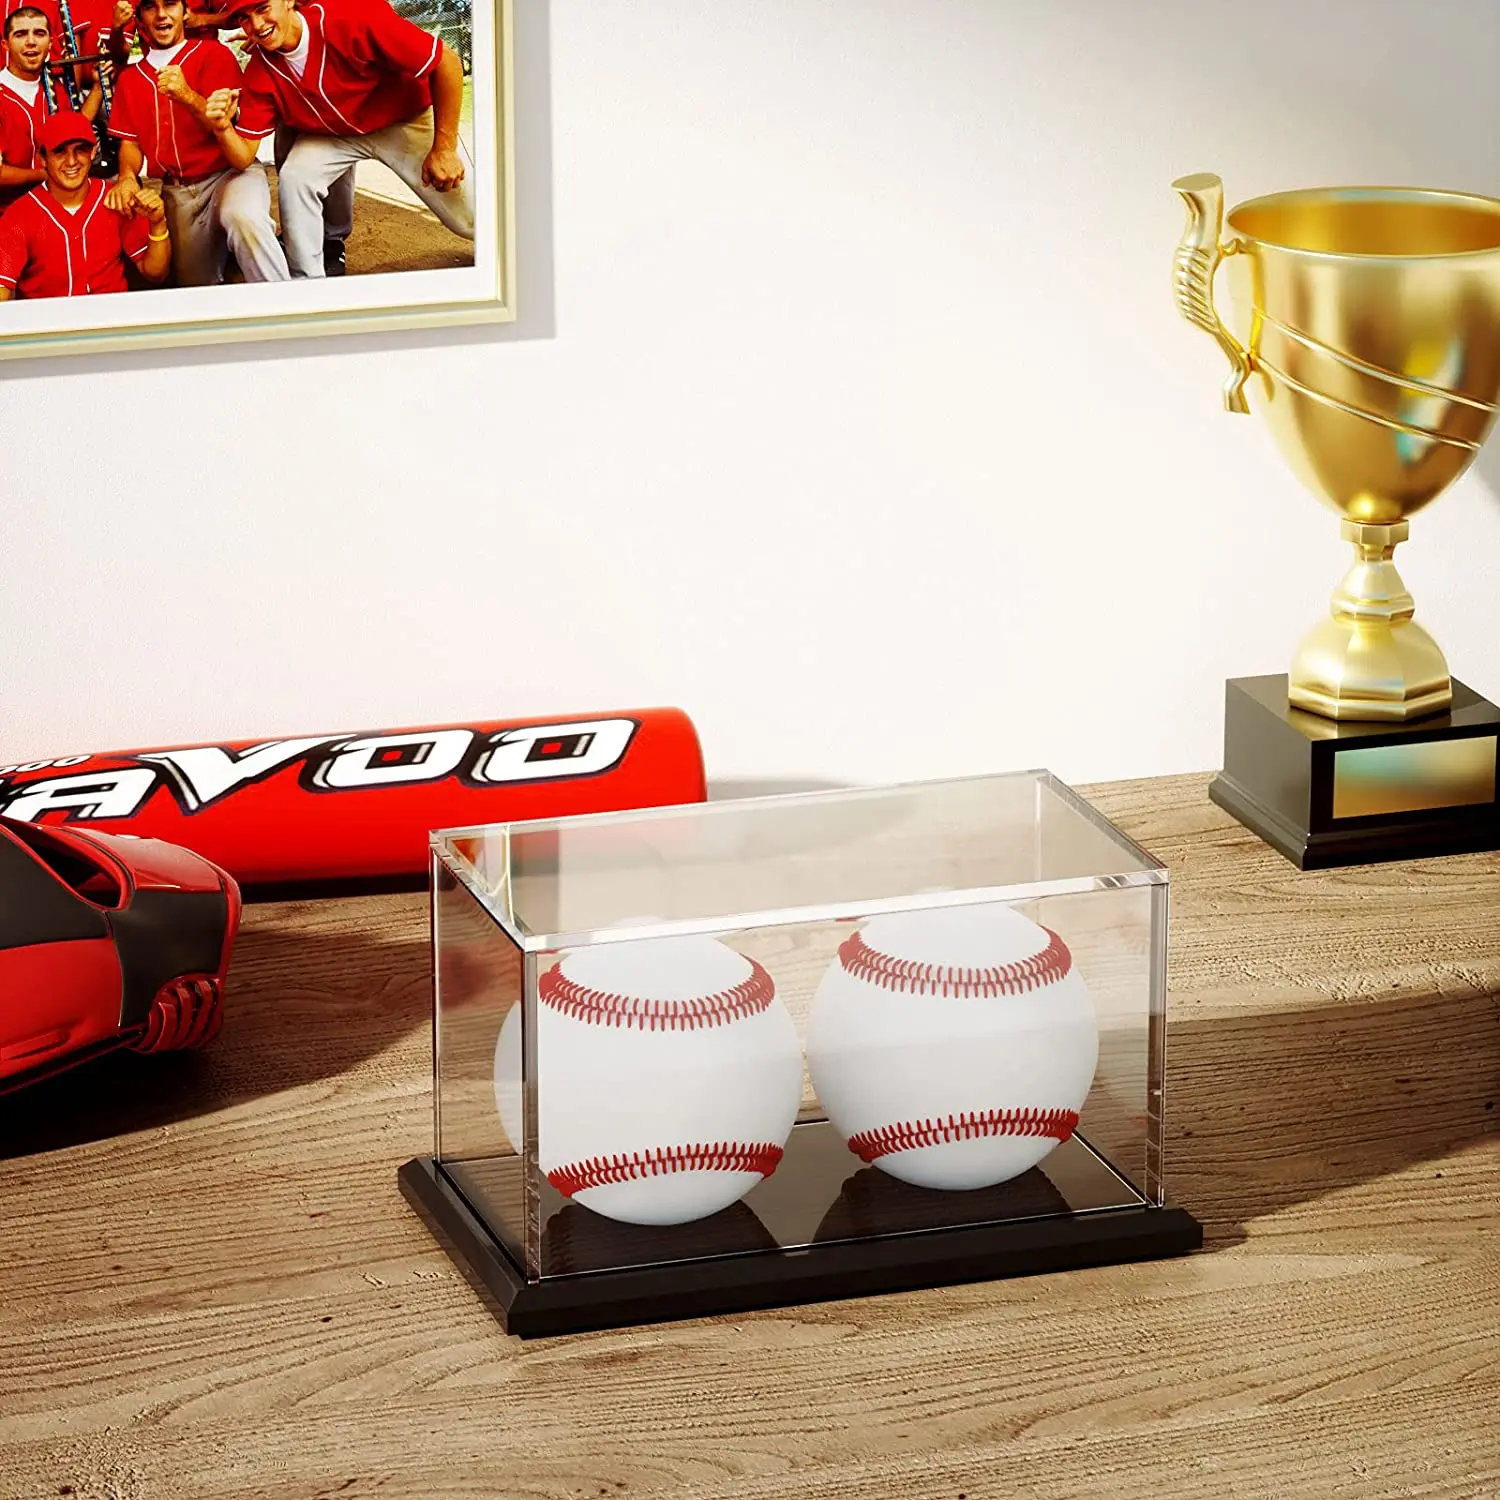 NIUBEE Baseball Display Case Acrylic Material and UV Protection Memorabilia Ball Storage Case for Official Size Ball. Clear Cube Baseball Display Box with Black Base 